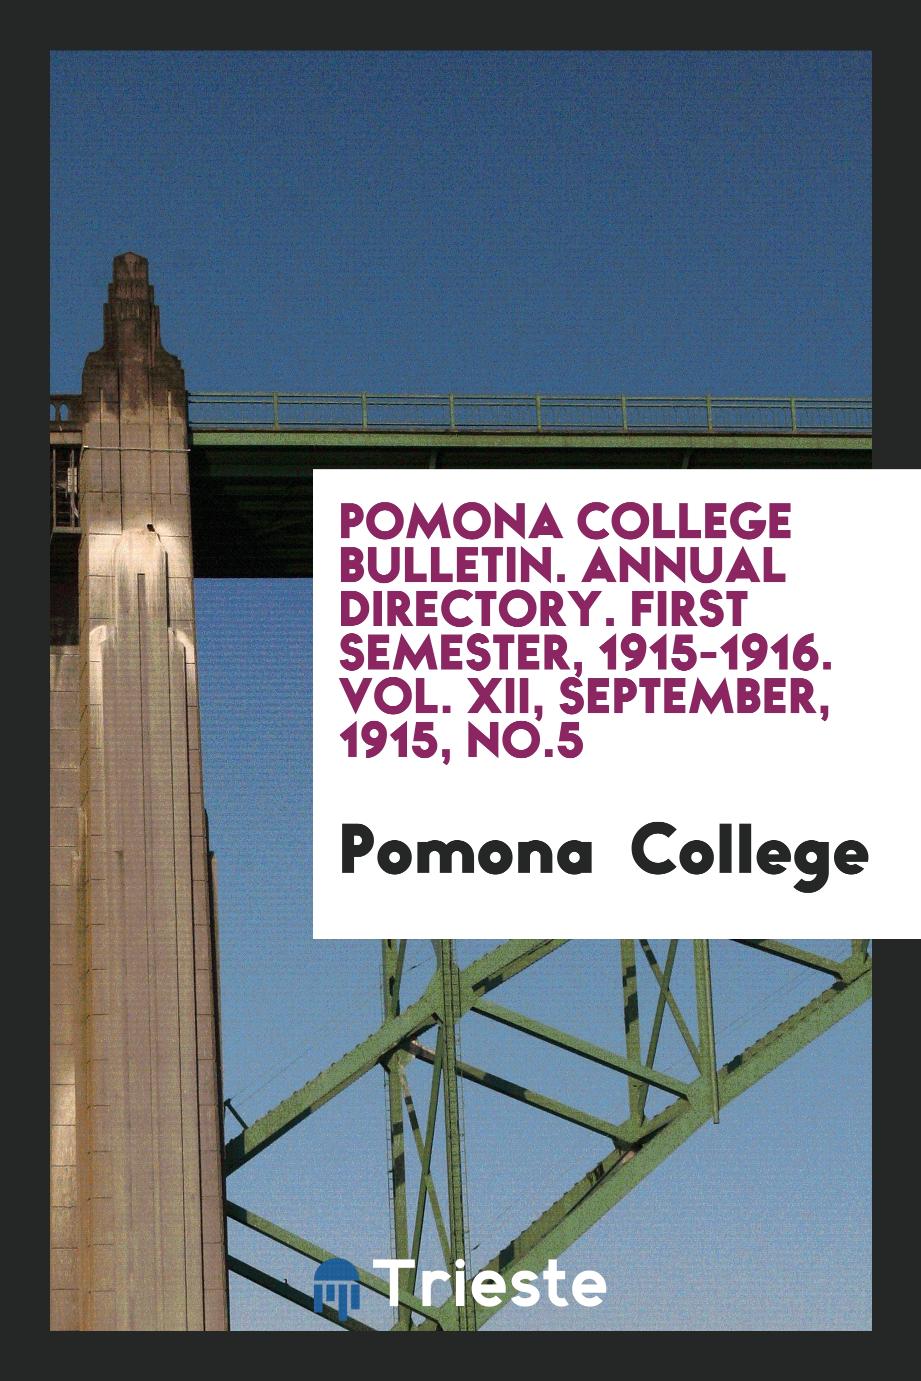 Pomona College Bulletin. Annual Directory. First Semester, 1915-1916. Vol. XII, September, 1915, No.5